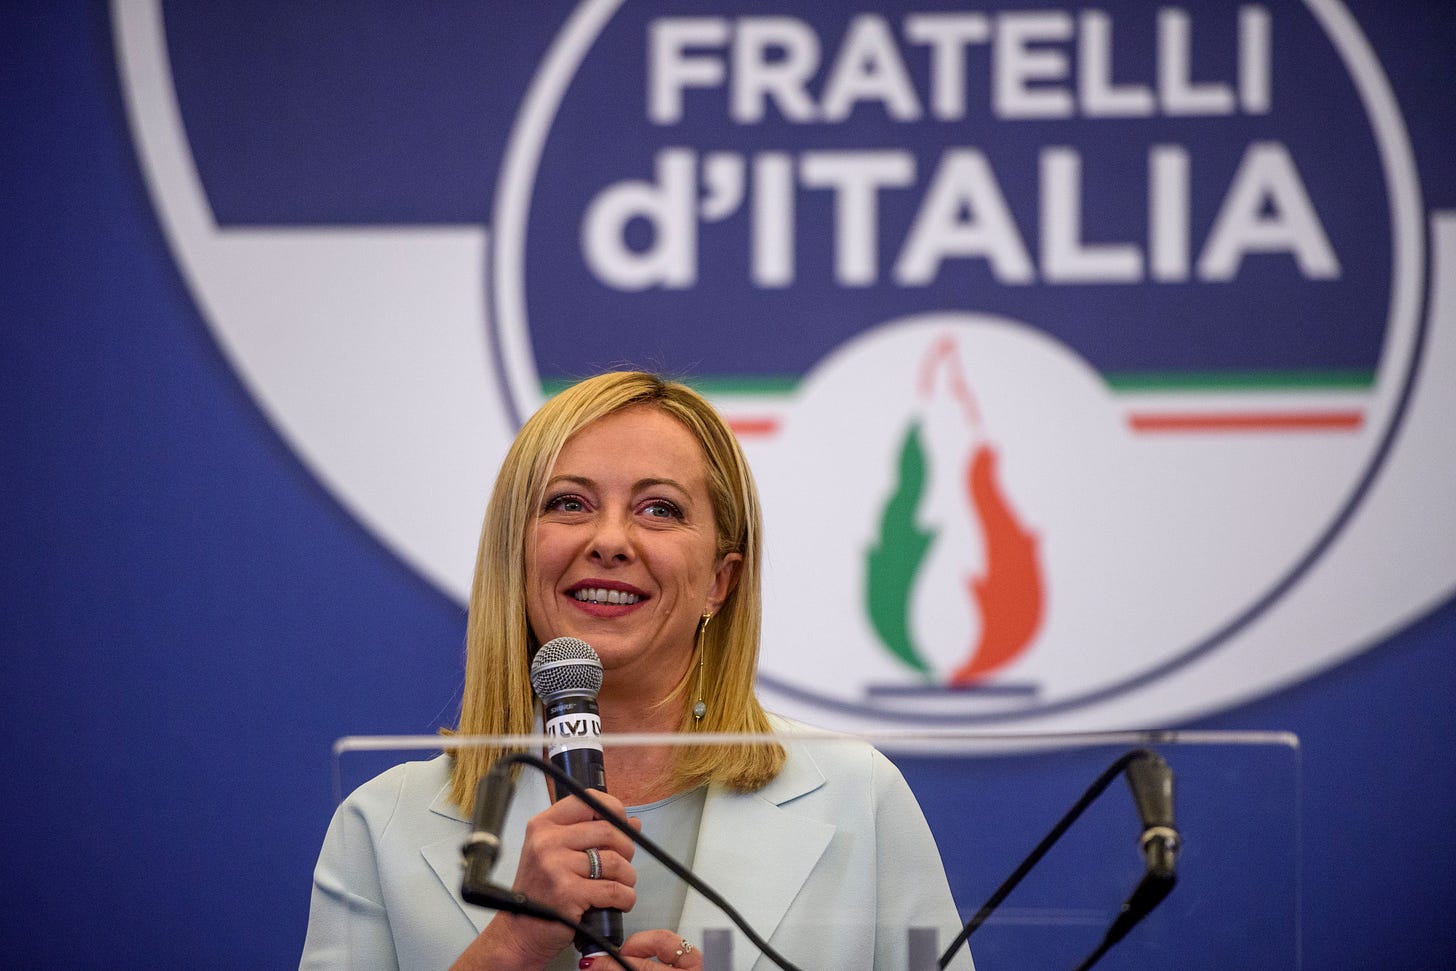 Giorgia Meloni speaks at a press conference at her party’s electoral headquarters on September 26, 2022 in Rome, Italy. (Photo by Antonio Masiello/Getty Images).